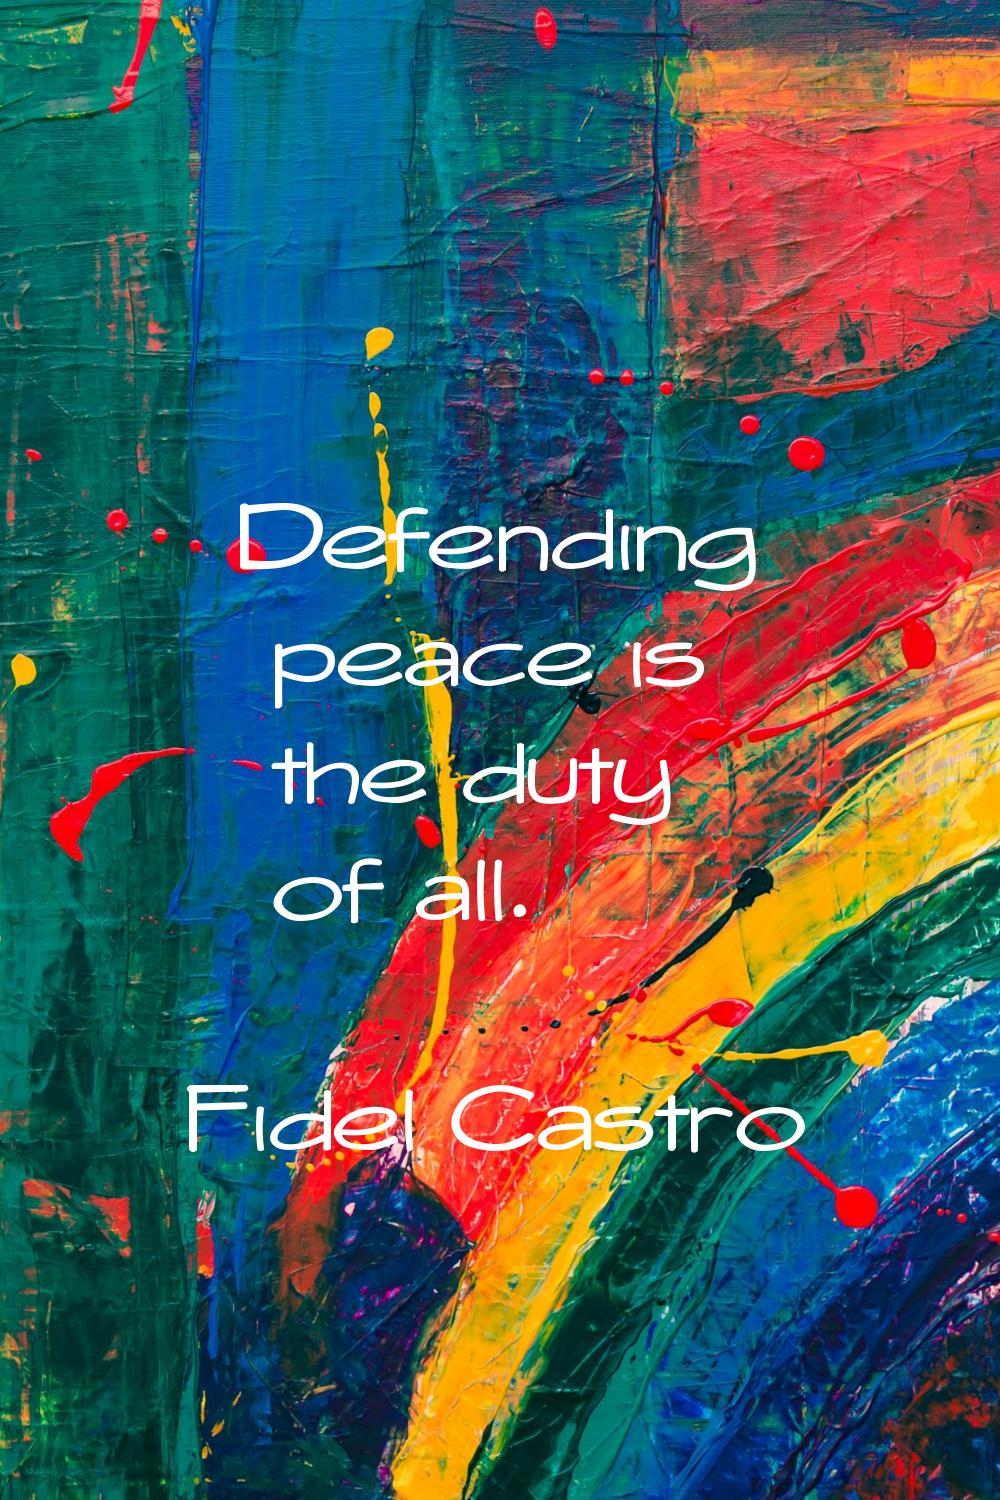 Defending peace is the duty of all.